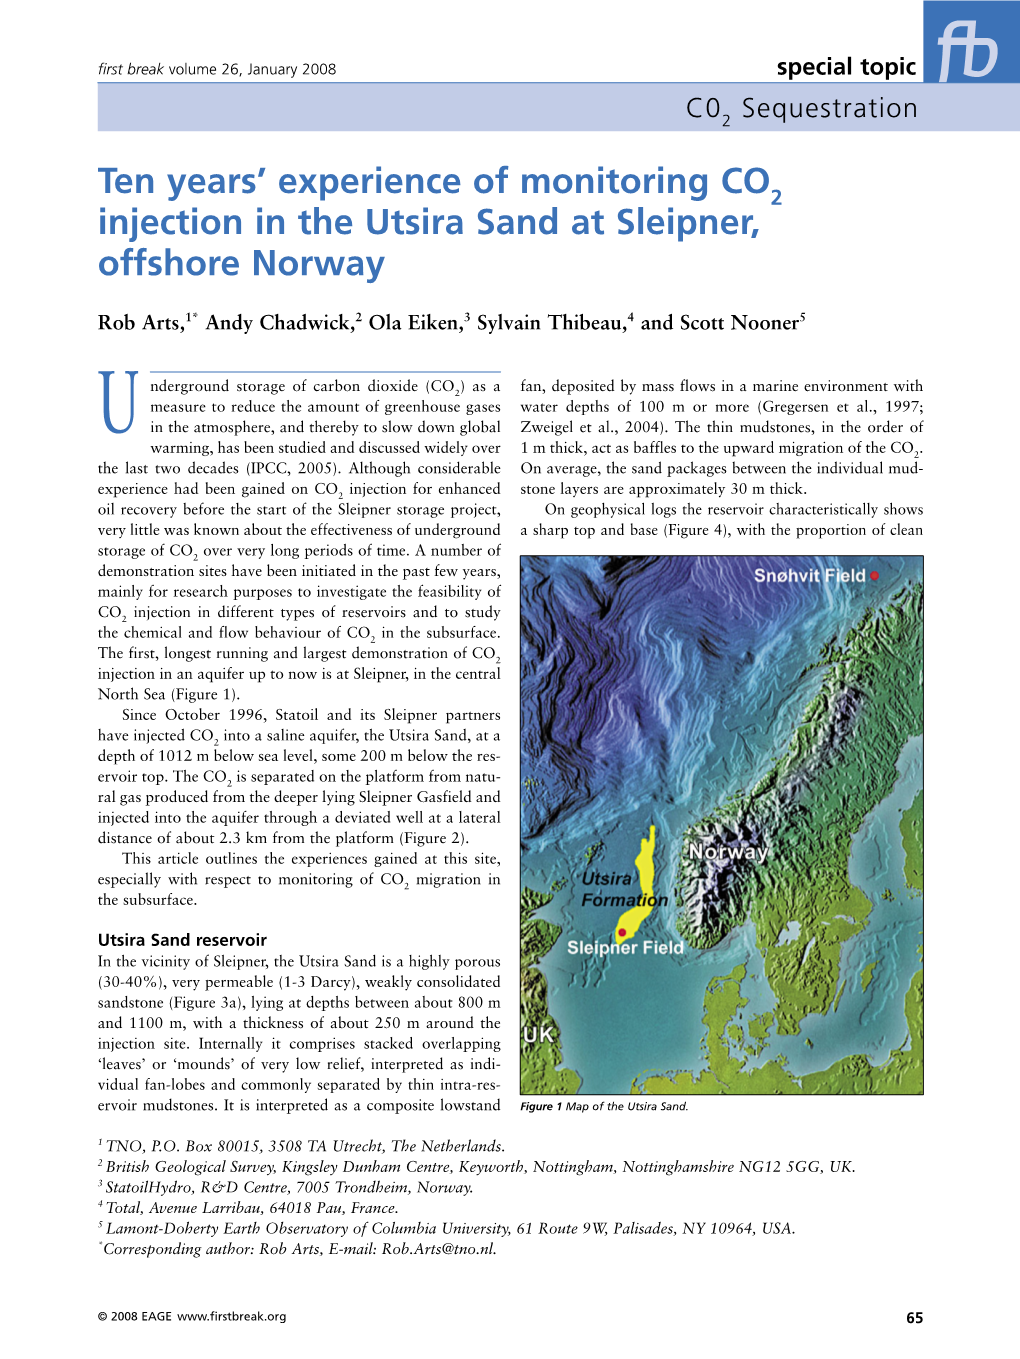 Ten Years' Experience of Monitoring CO Injection in the Utsira Sand At